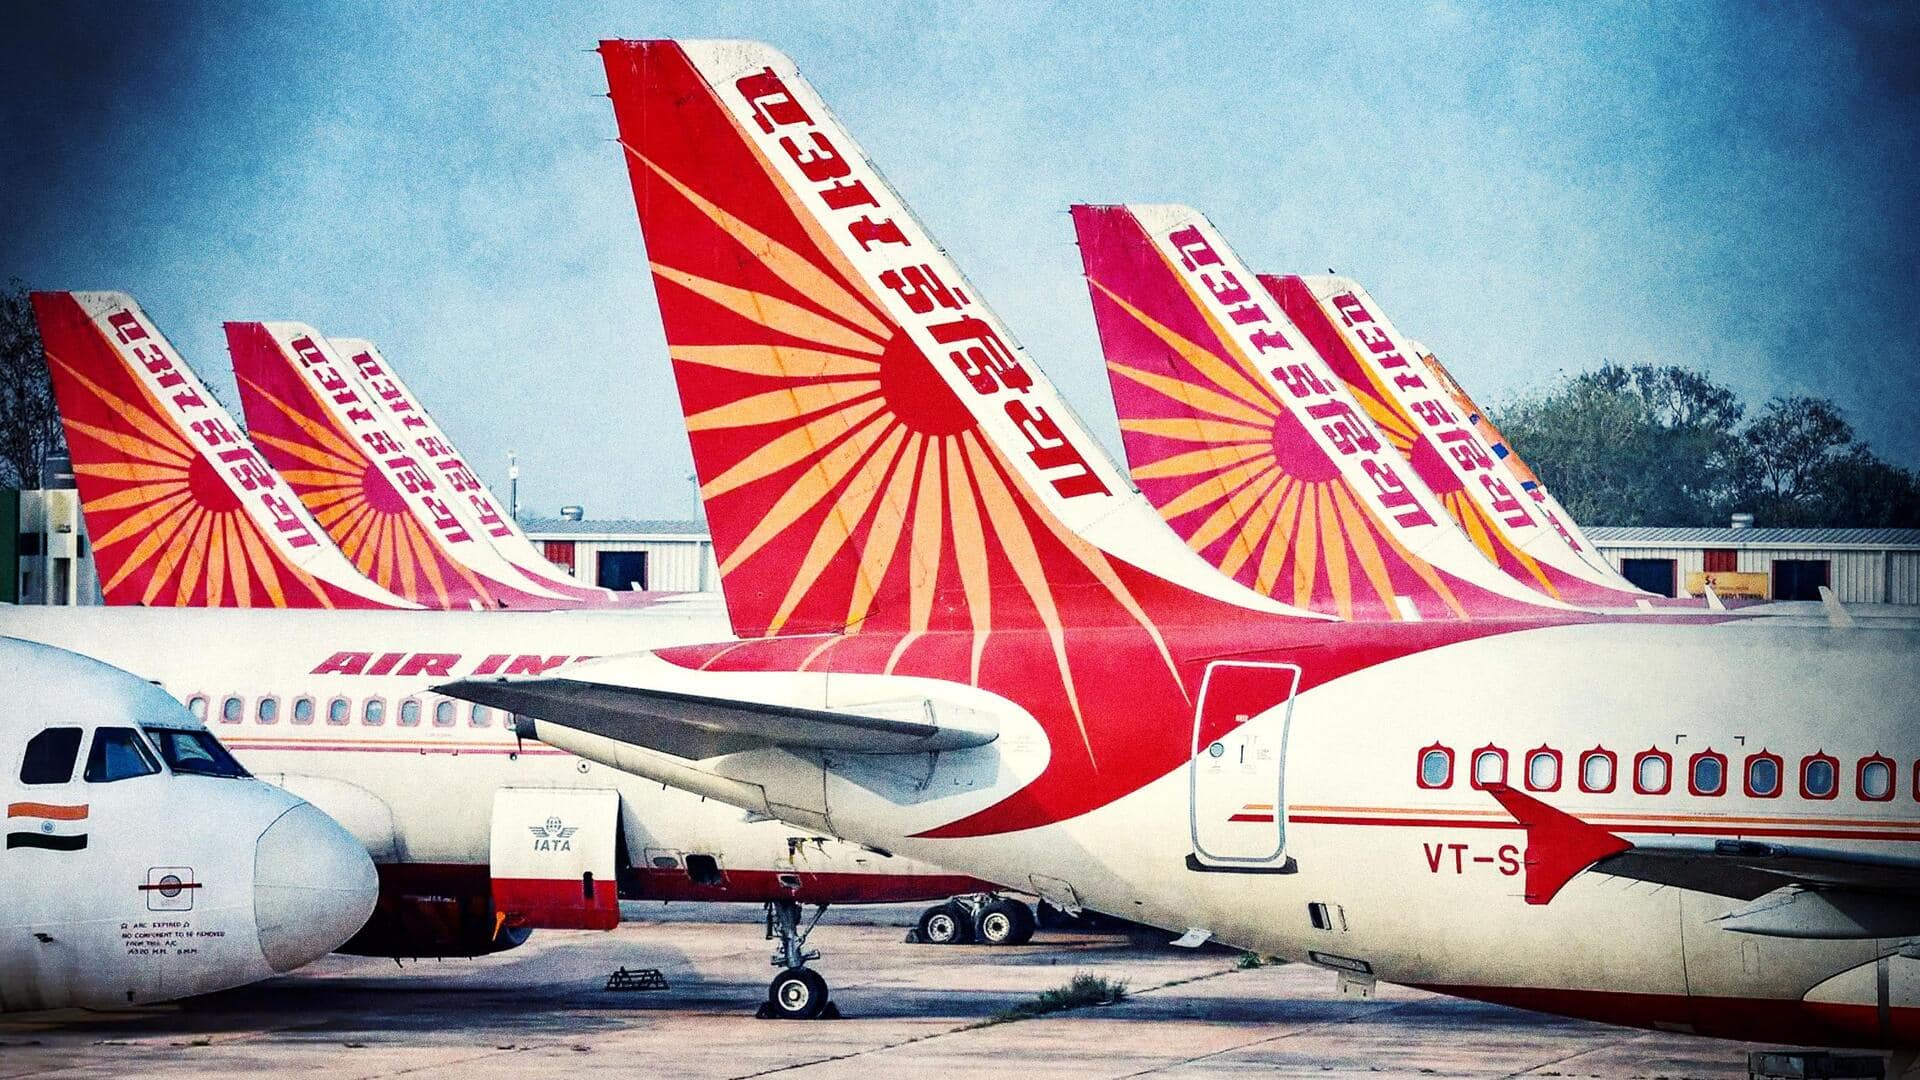 DGCA suspends Air India's safety chief over 'perfunctory' audits